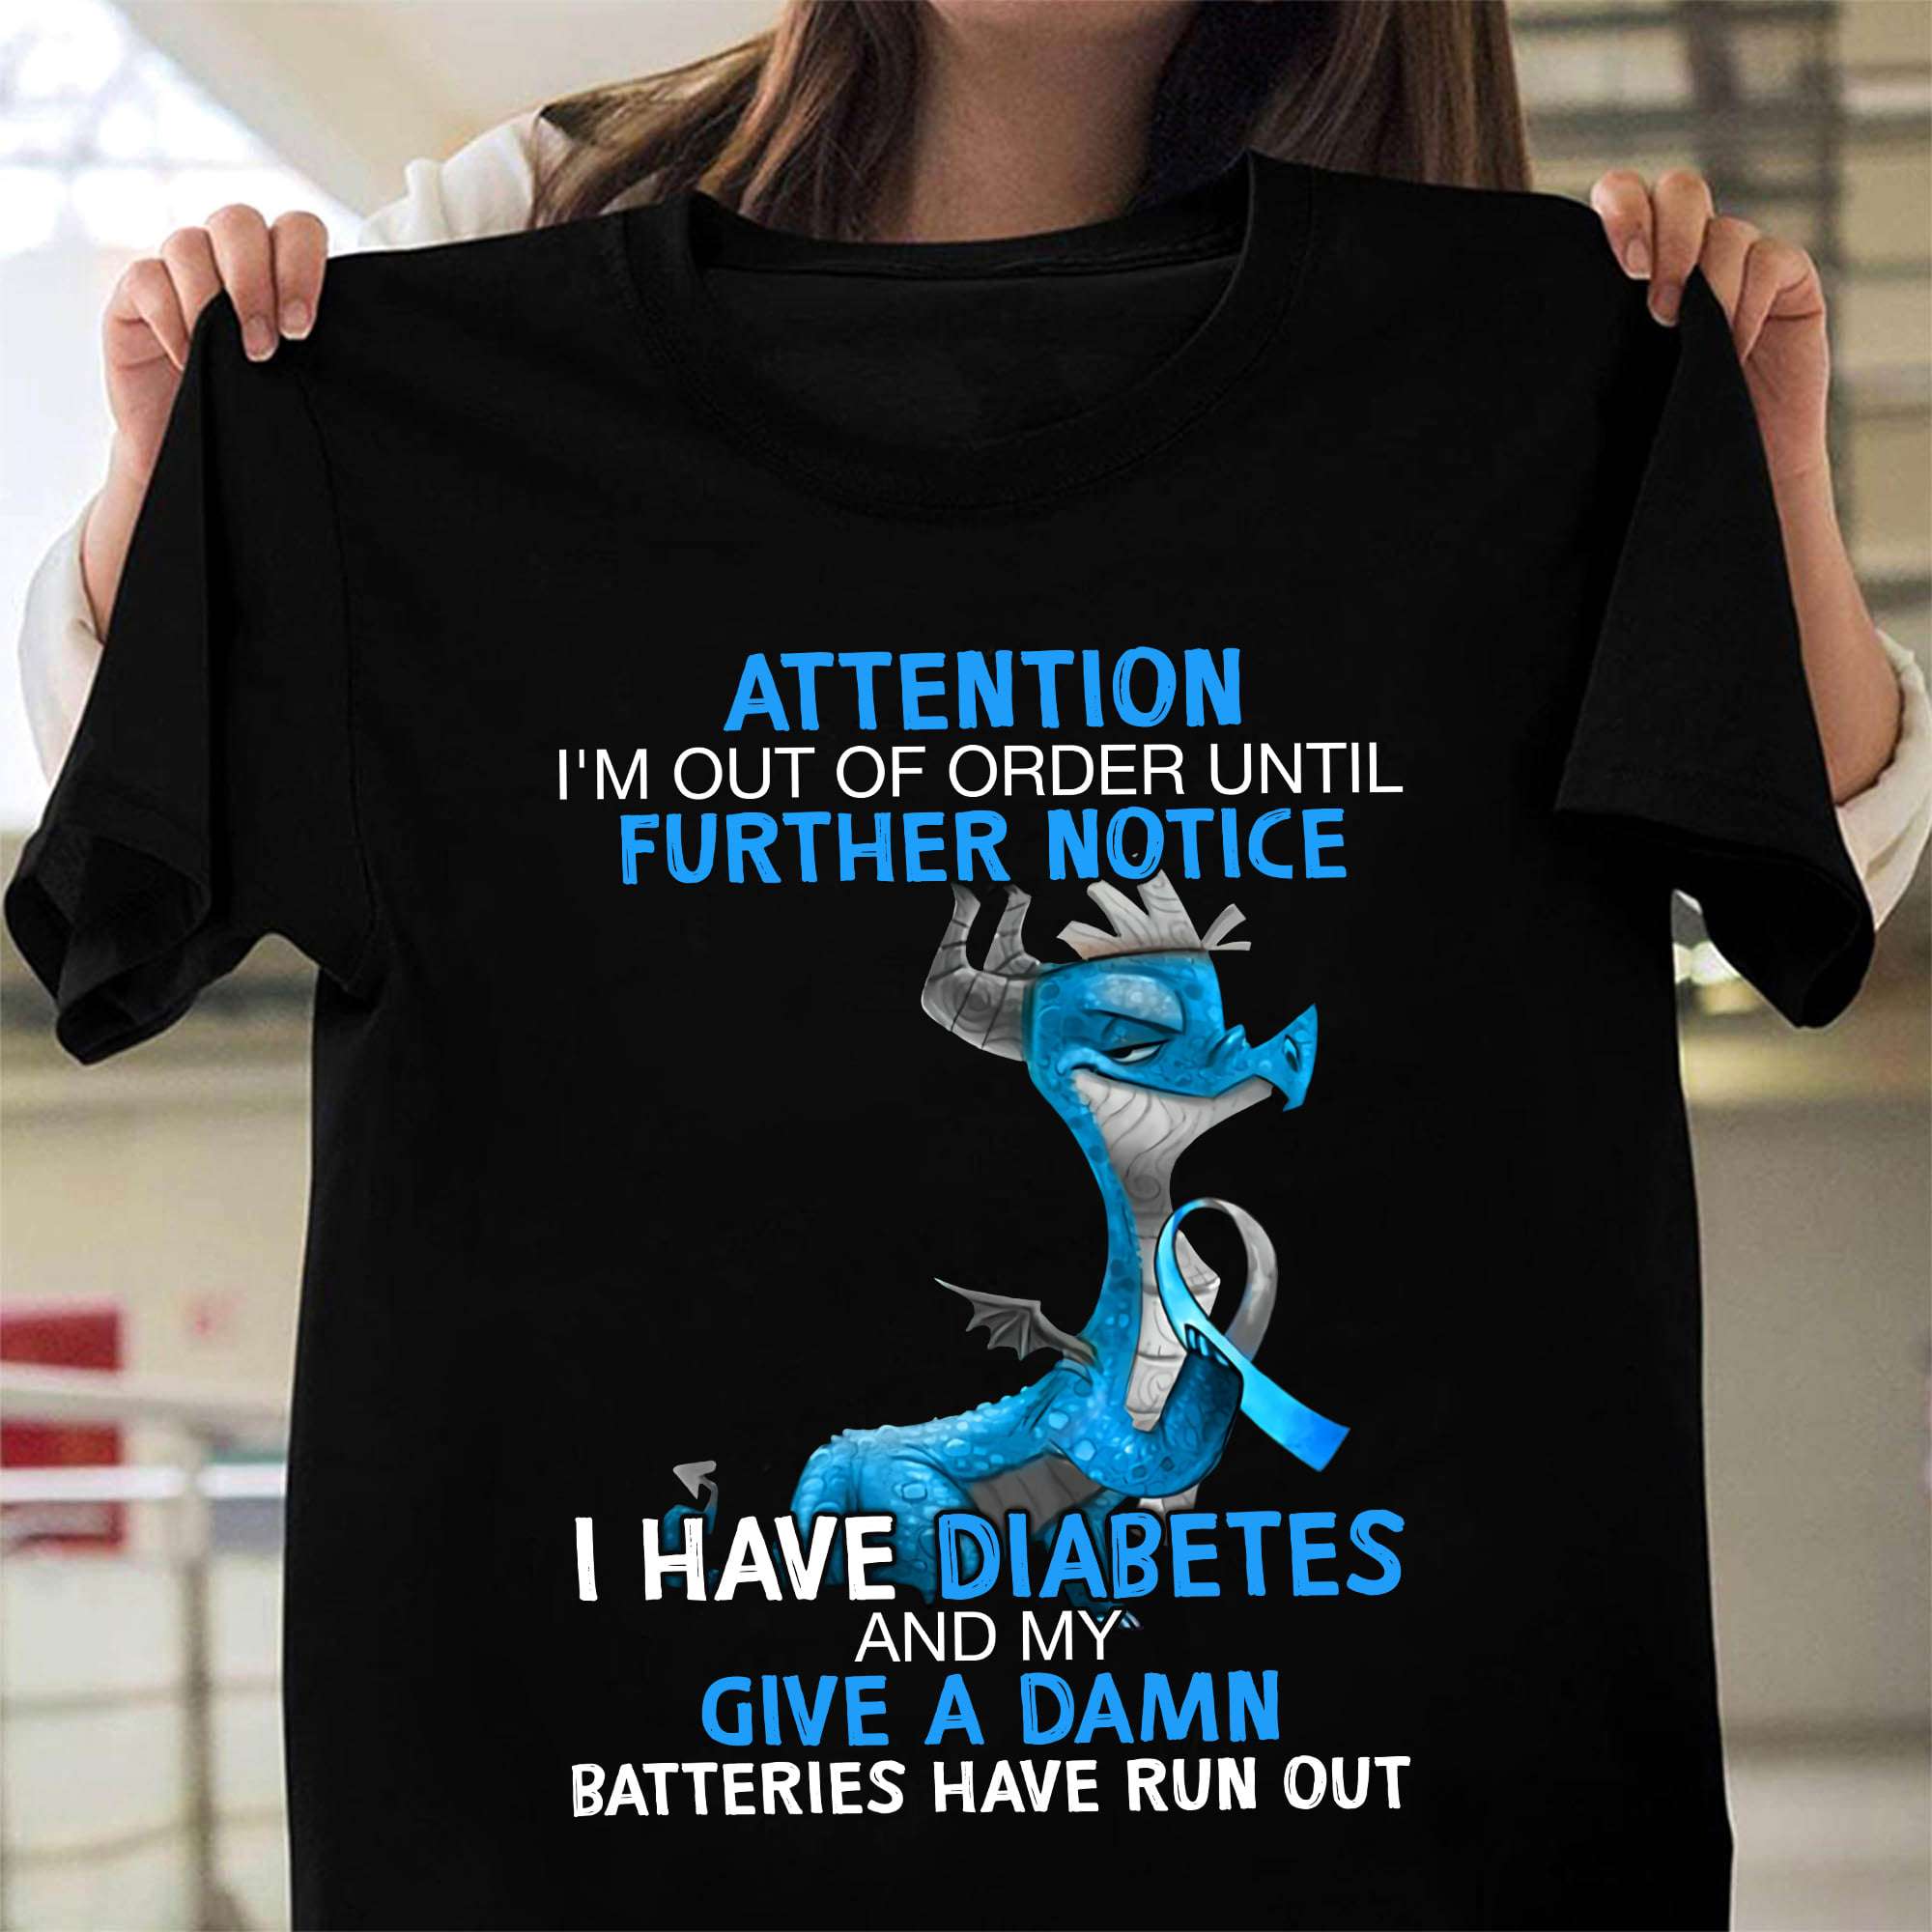 Attention I'm out of order until further notice - Diabetes awareness, diabetic dragon ribbonAttention I'm out of order until further notice - Diabetes awareness, diabetic dragon ribbon